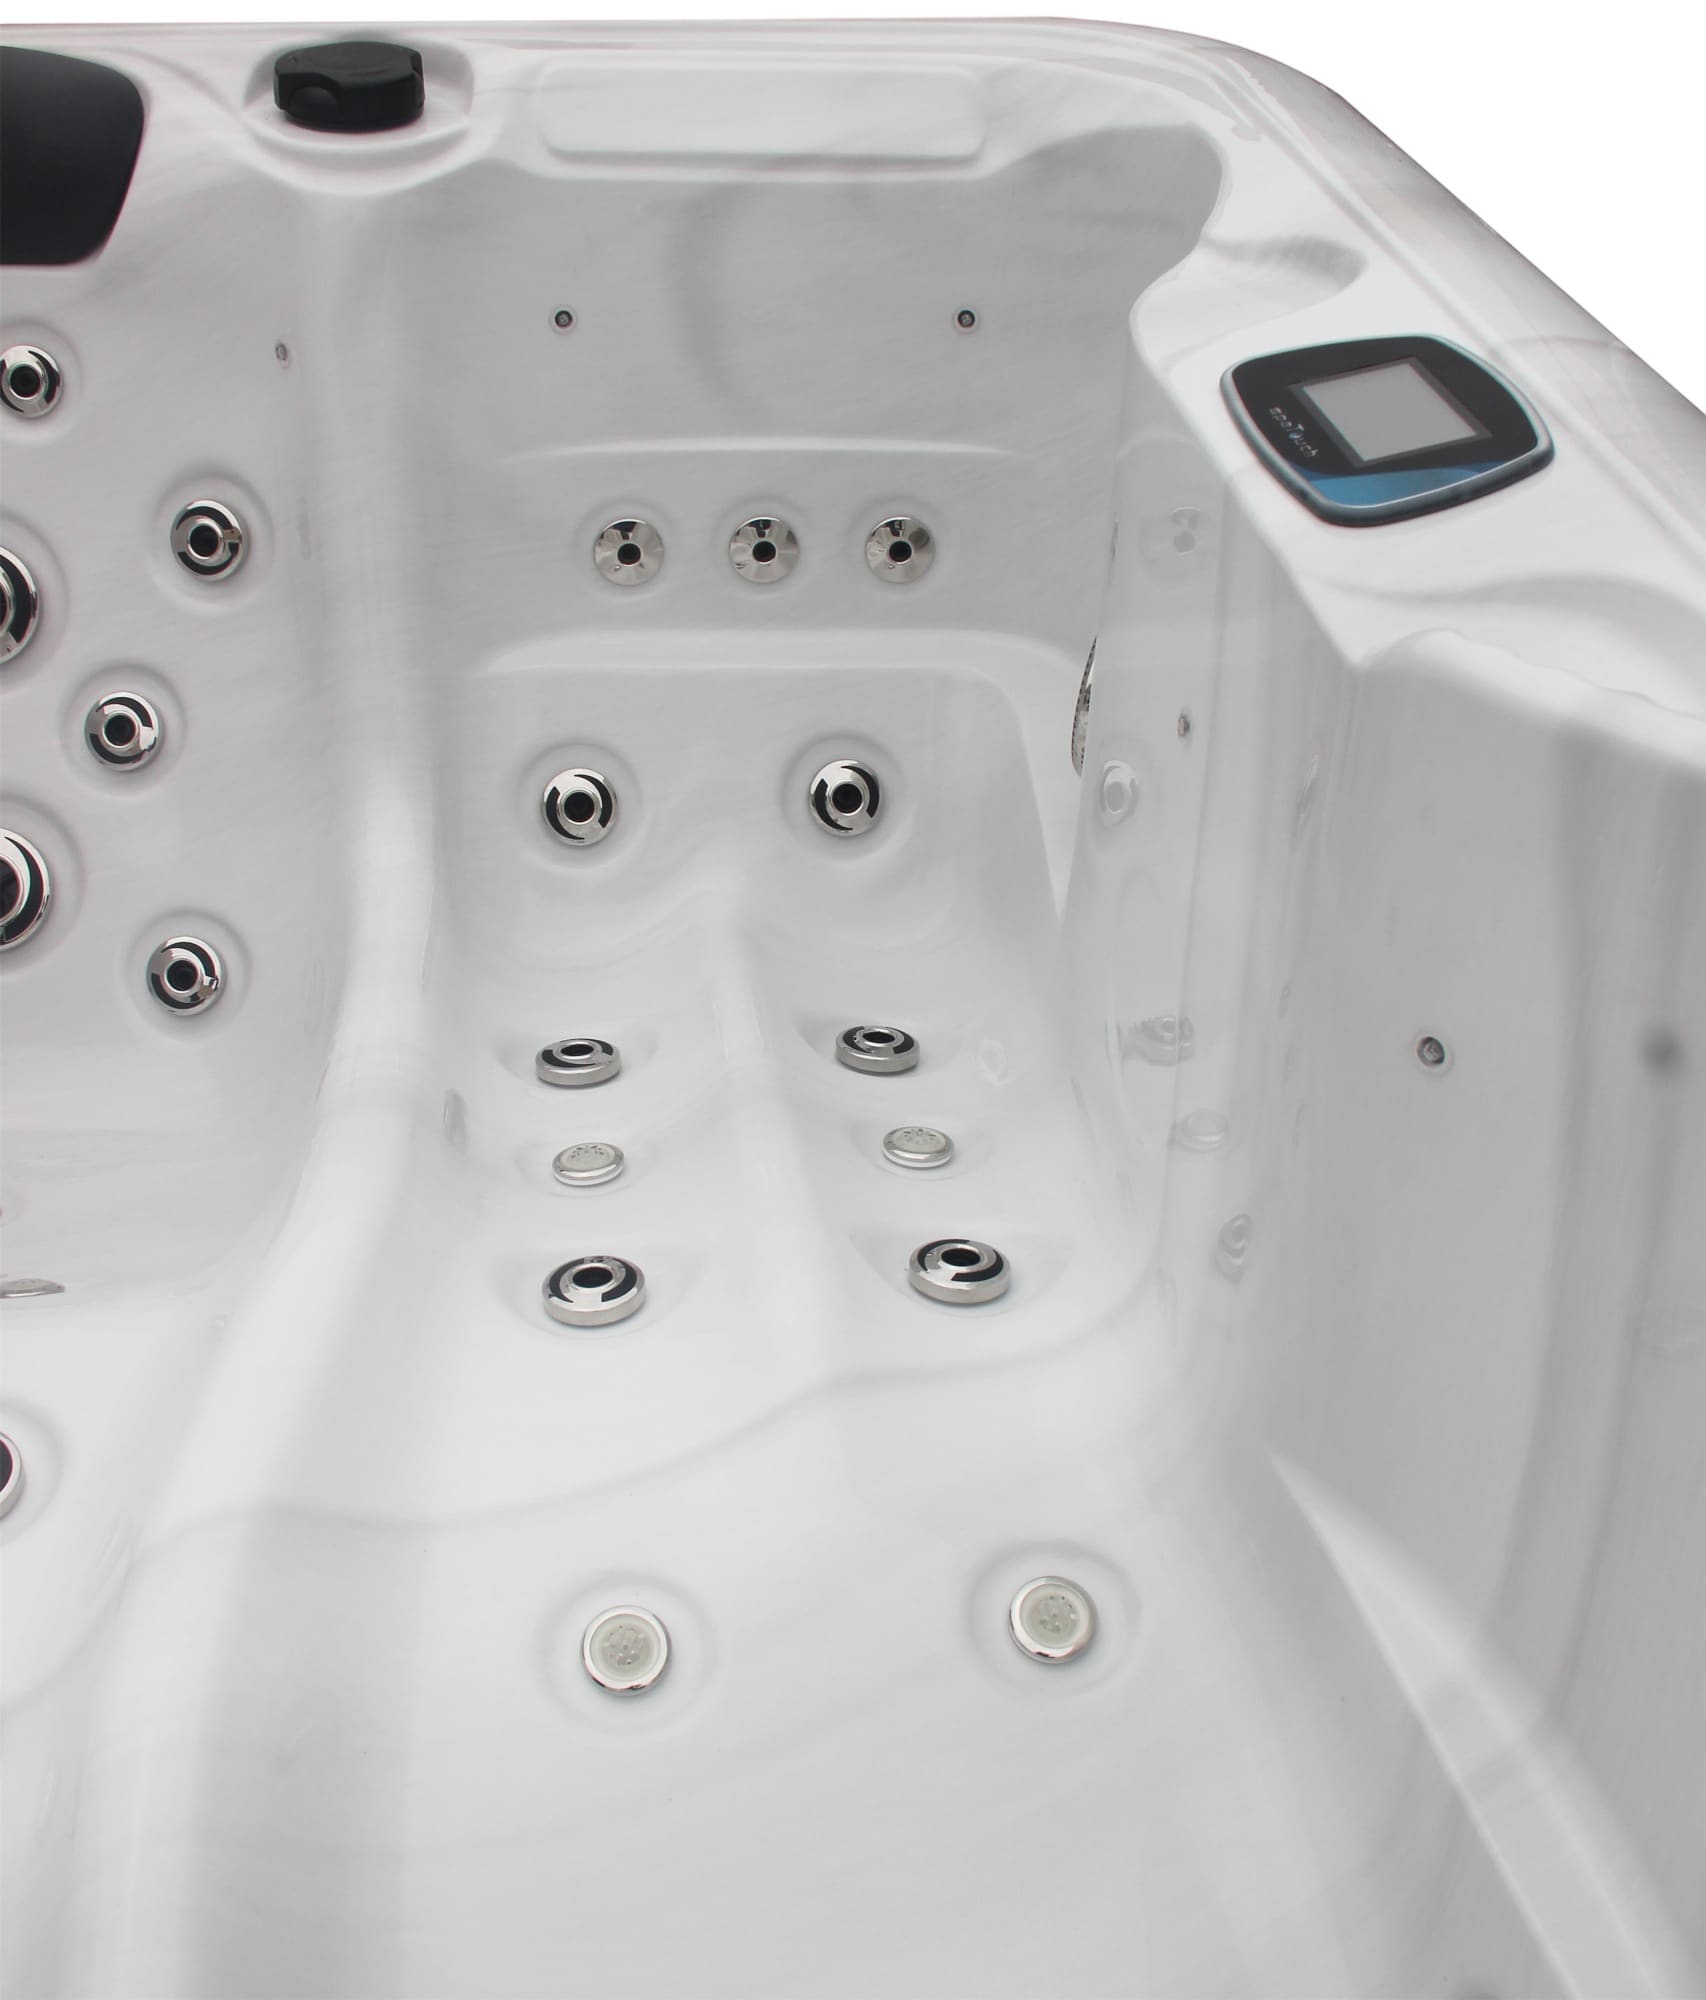 Jaquar Nuovo Hot Tub Spa 2 Seater Jets